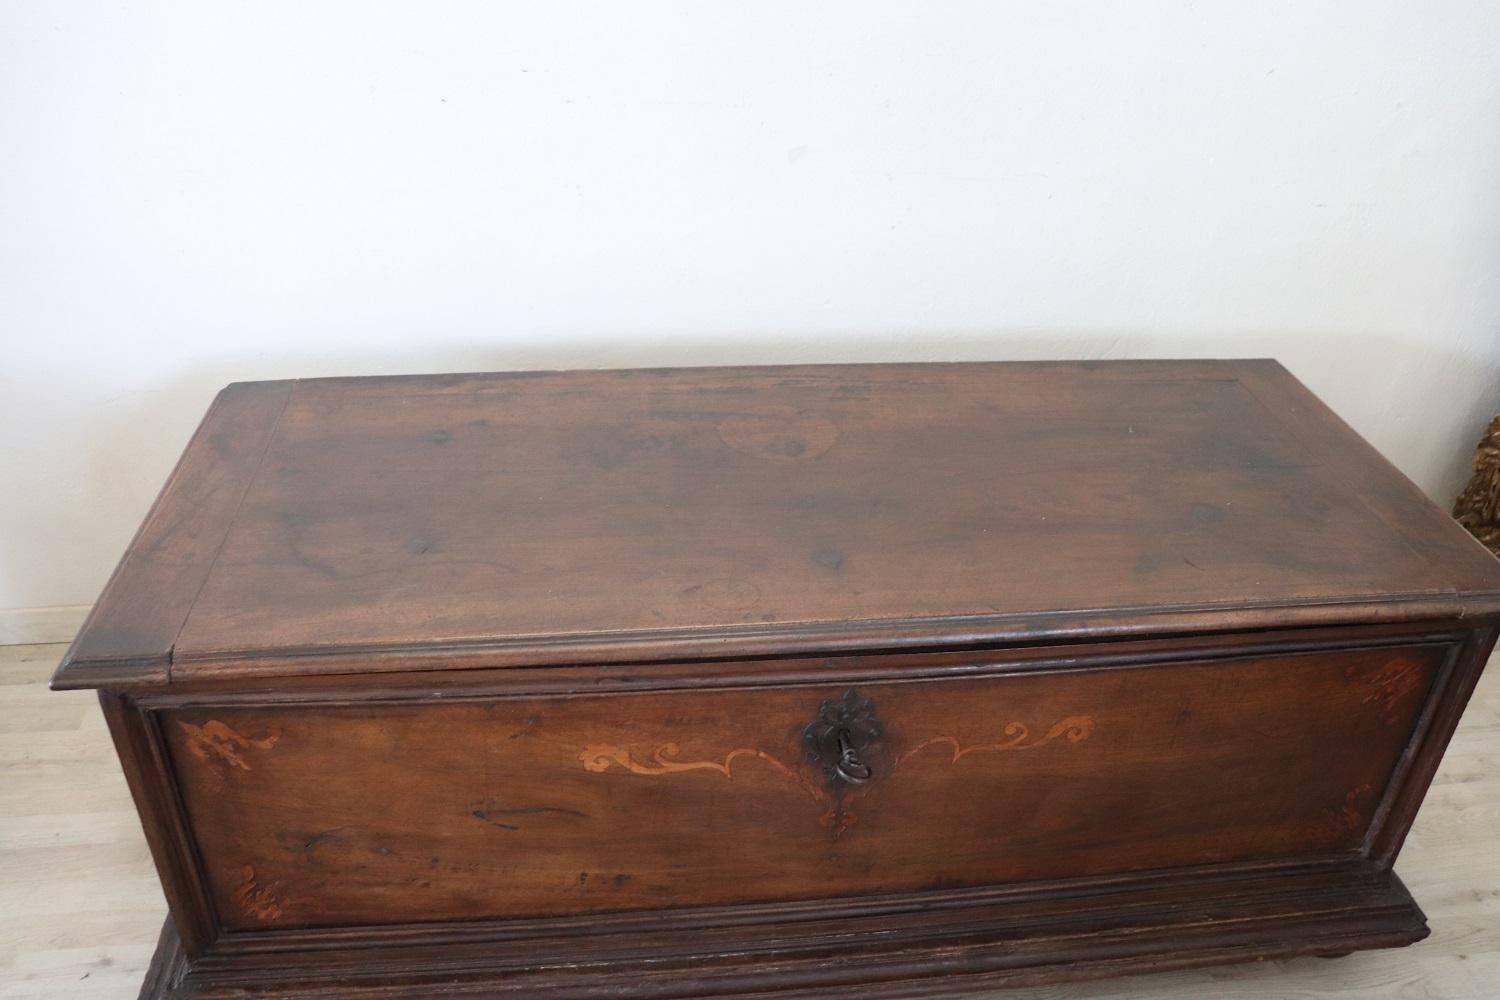 Inlay Majestic 17th Century Italian Inlaid Solid Walnut Antique Blanket Chest Restored For Sale